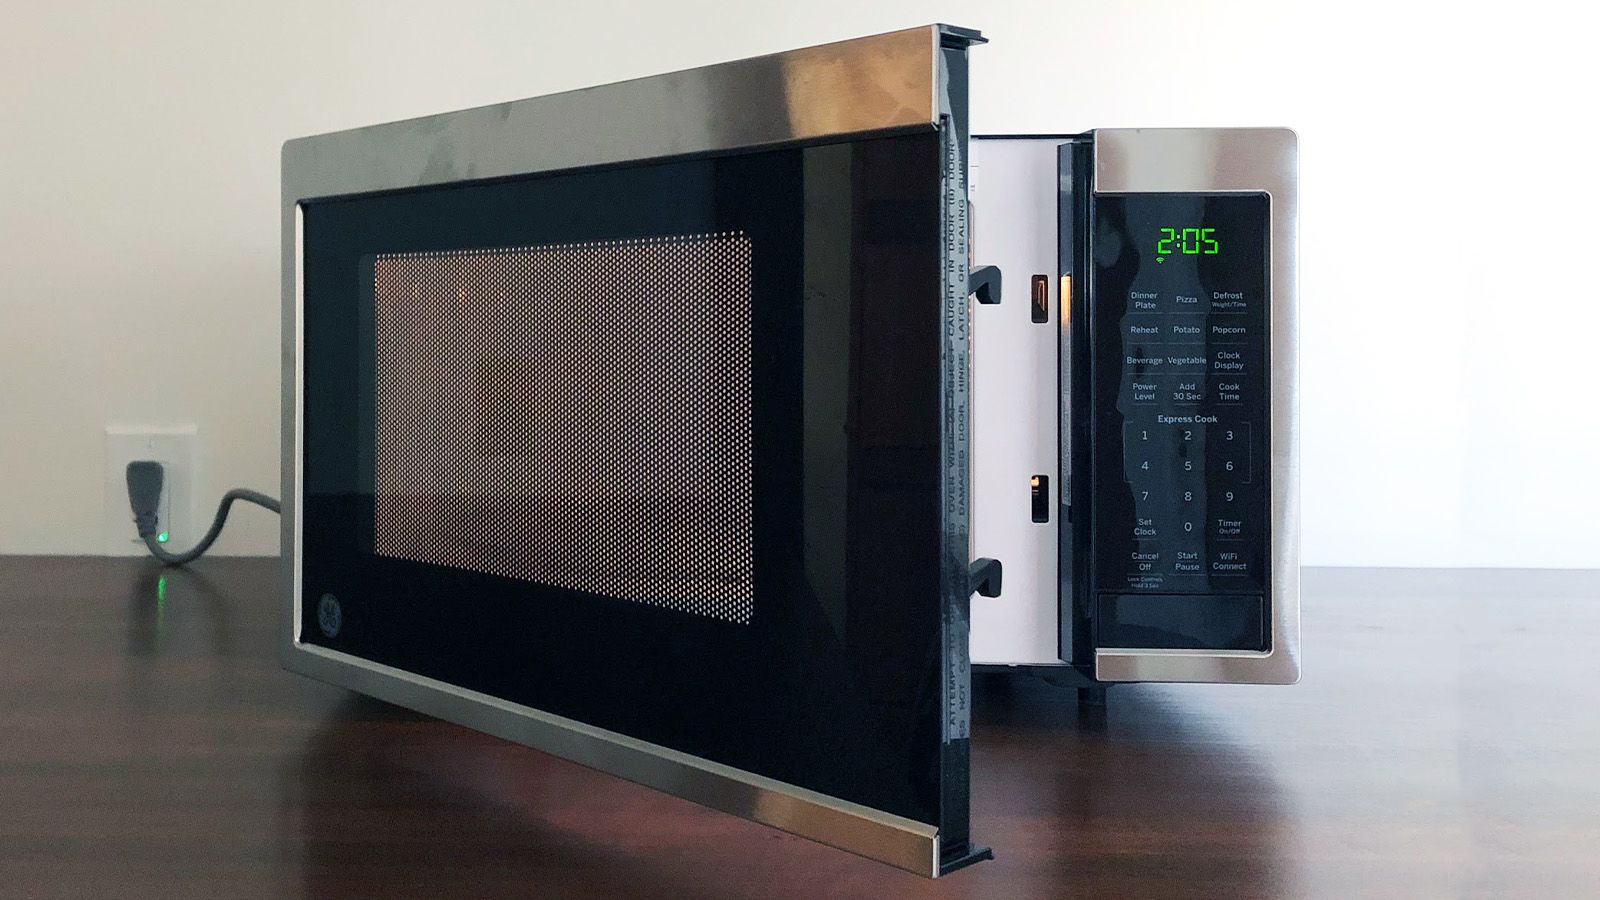 Best Countertop Microwaves for $150 or Less - Consumer Reports